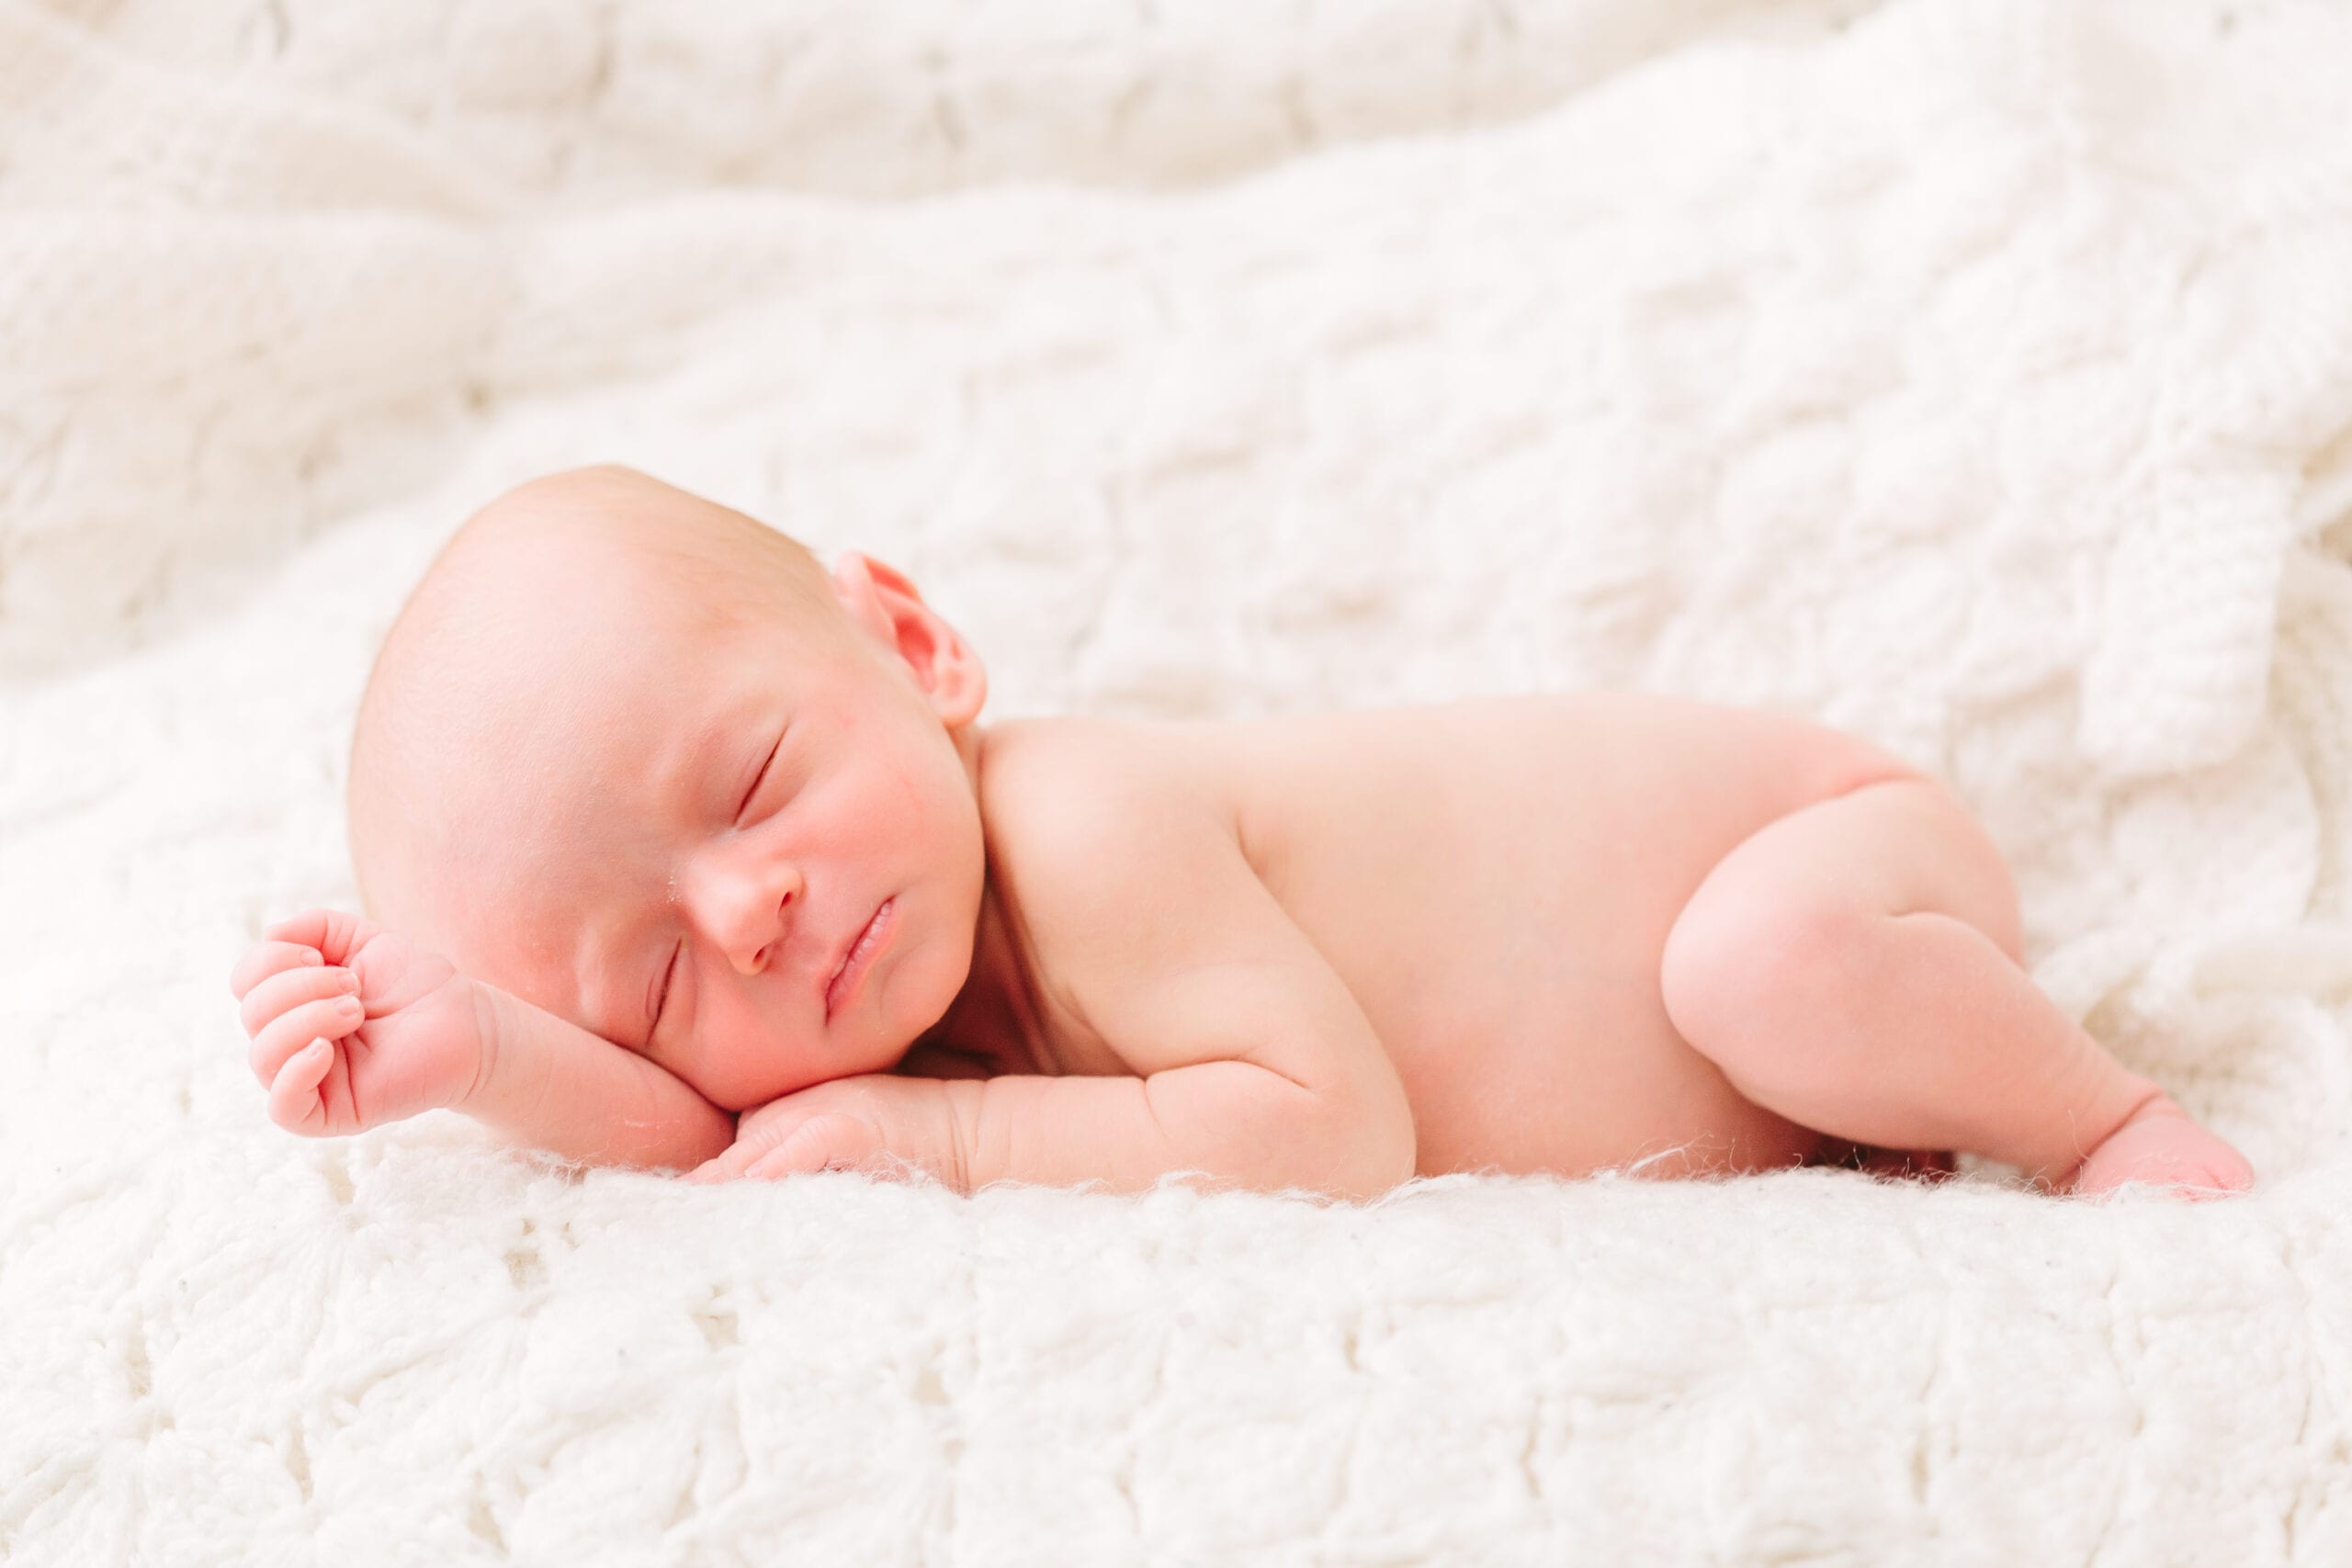 Maryland Newborn Photography by Lauren Myers Photography #Newborn #NewbornPhotography